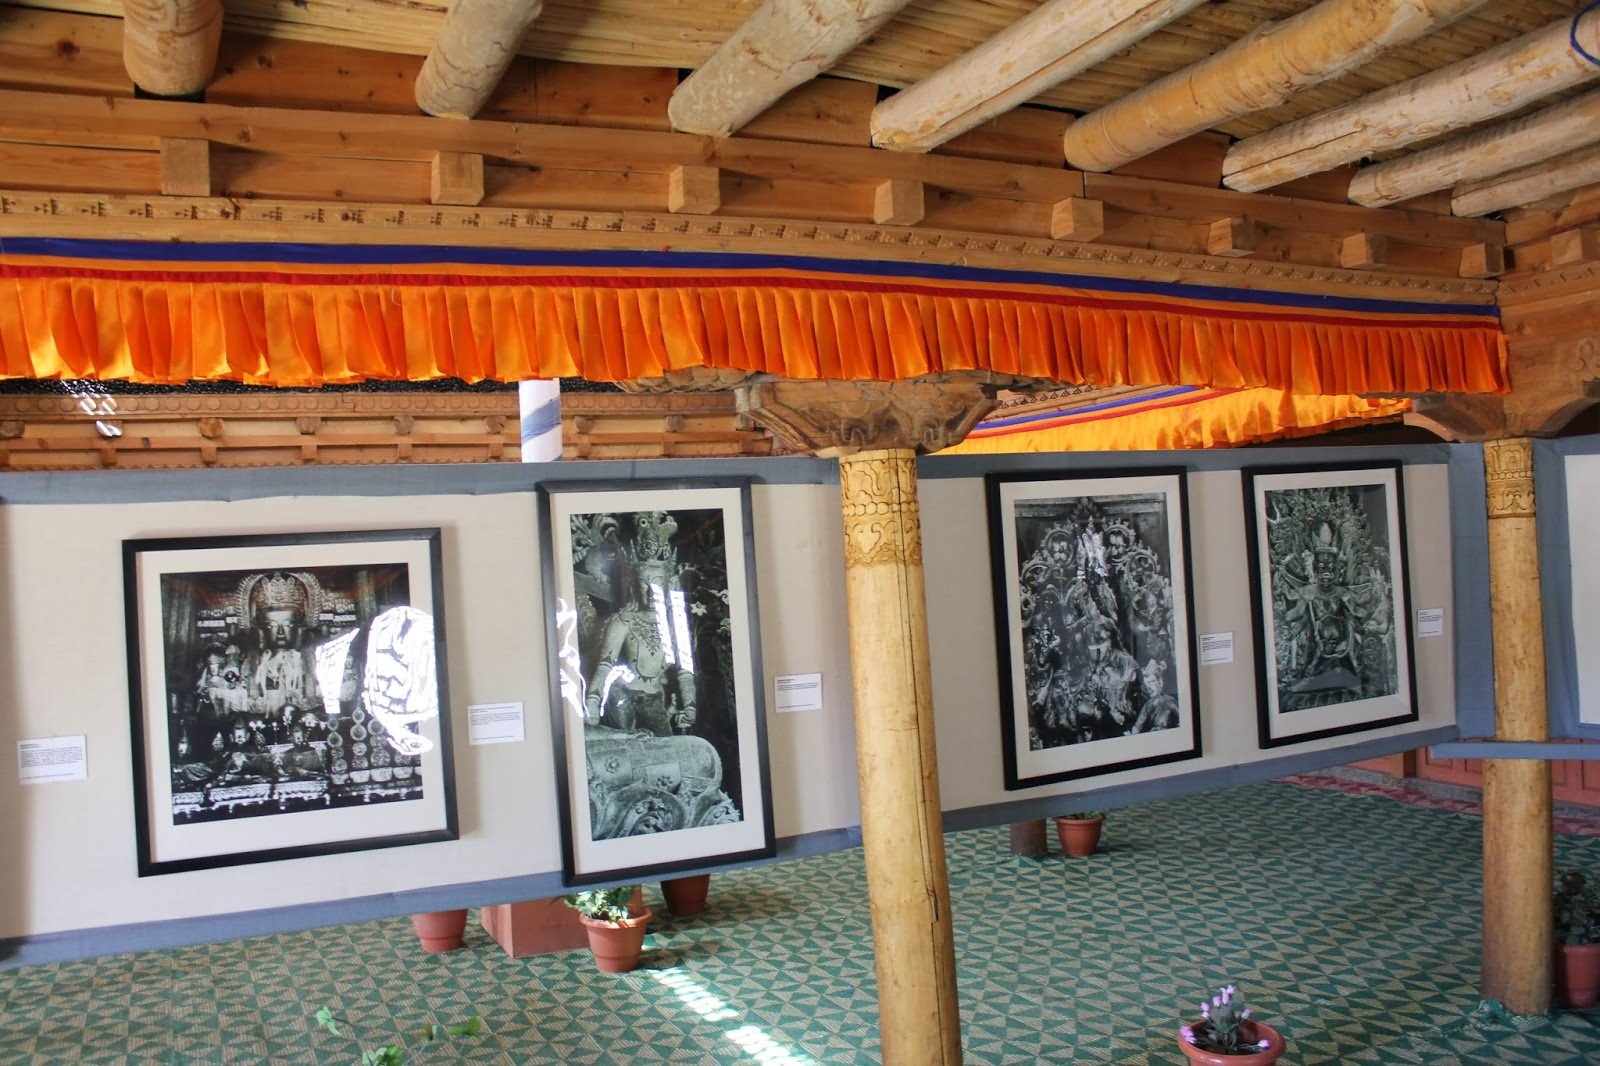 Gallery Inside The Leh Palace